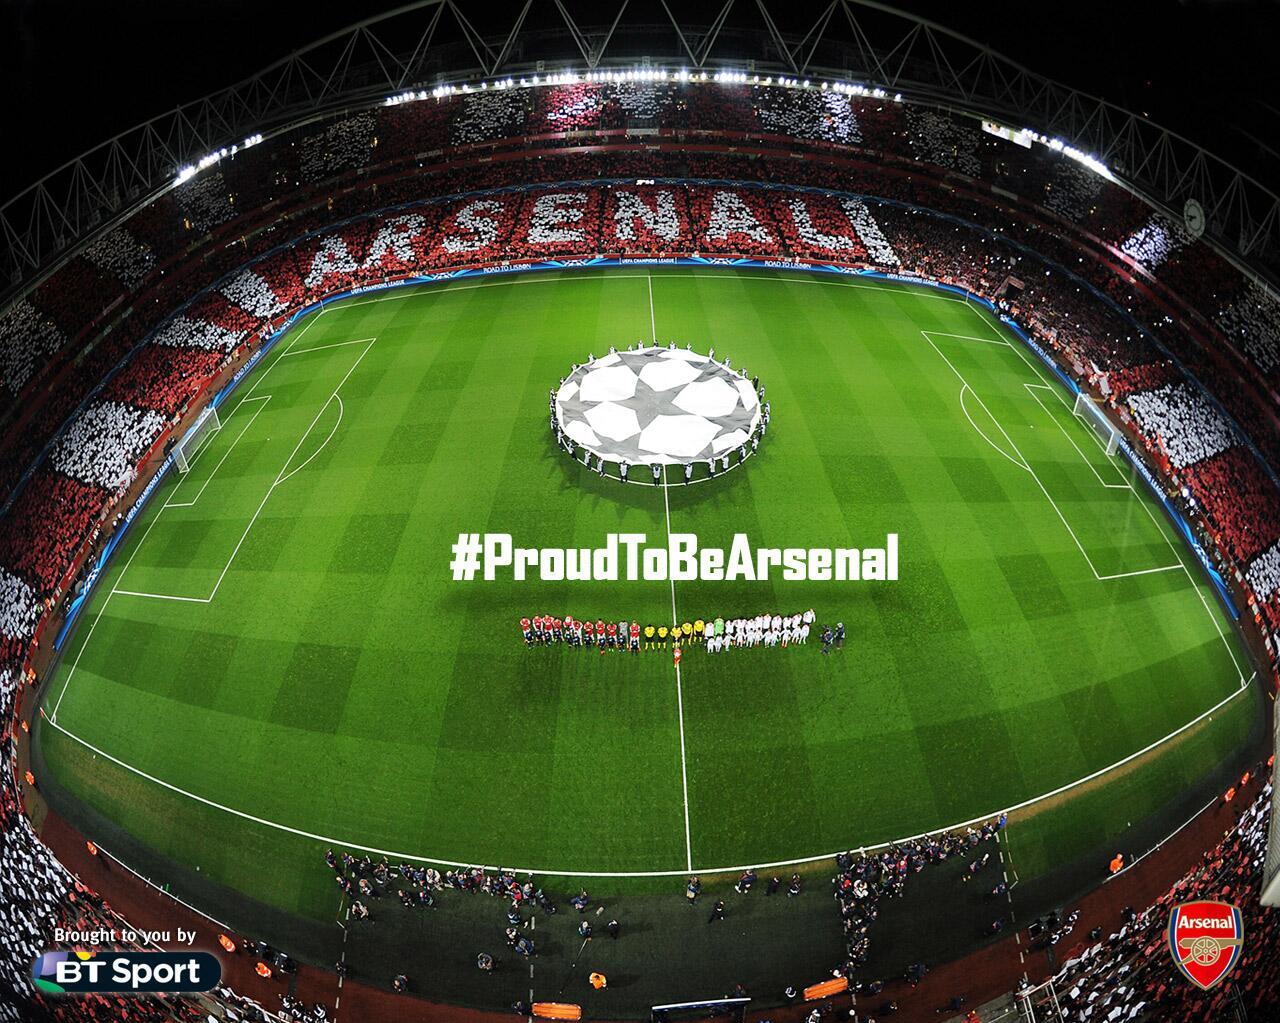 Arsenal On Our Wallpaper Featuring The